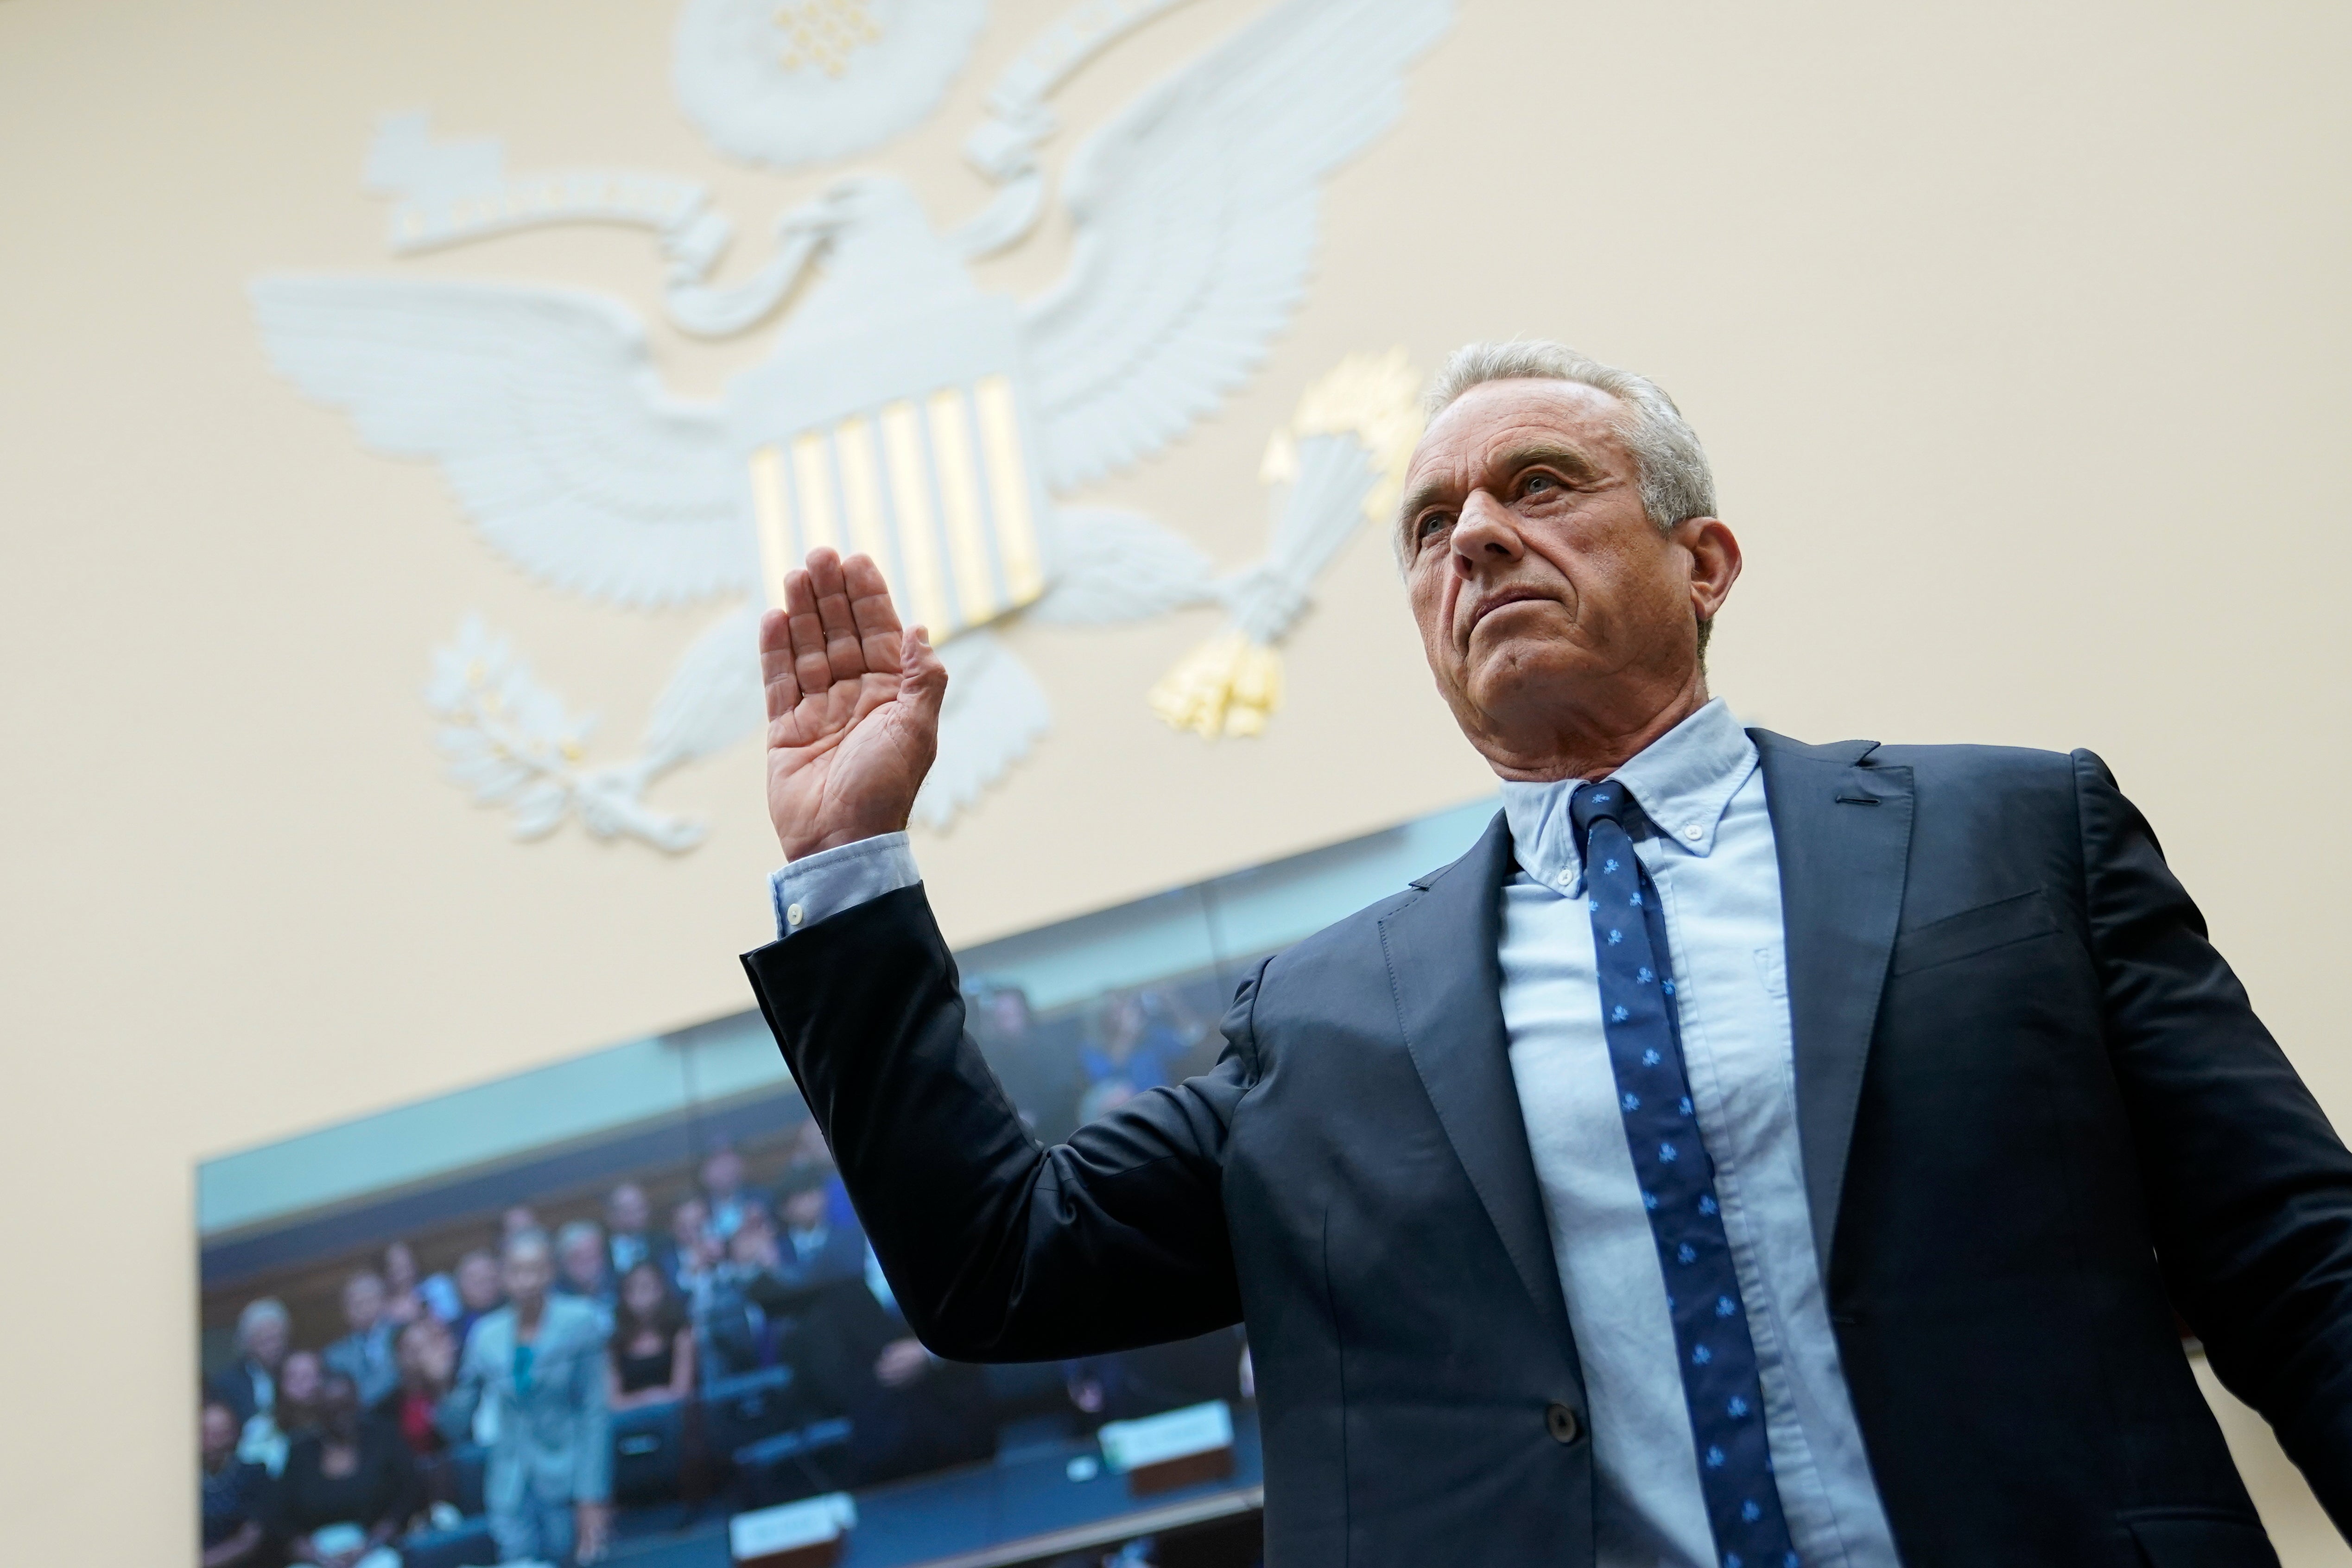 Robert F Kennedy Jr is sworn in before testifying at a House Judiciary Select Subcommittee on the Weaponization of the Federal Government in July